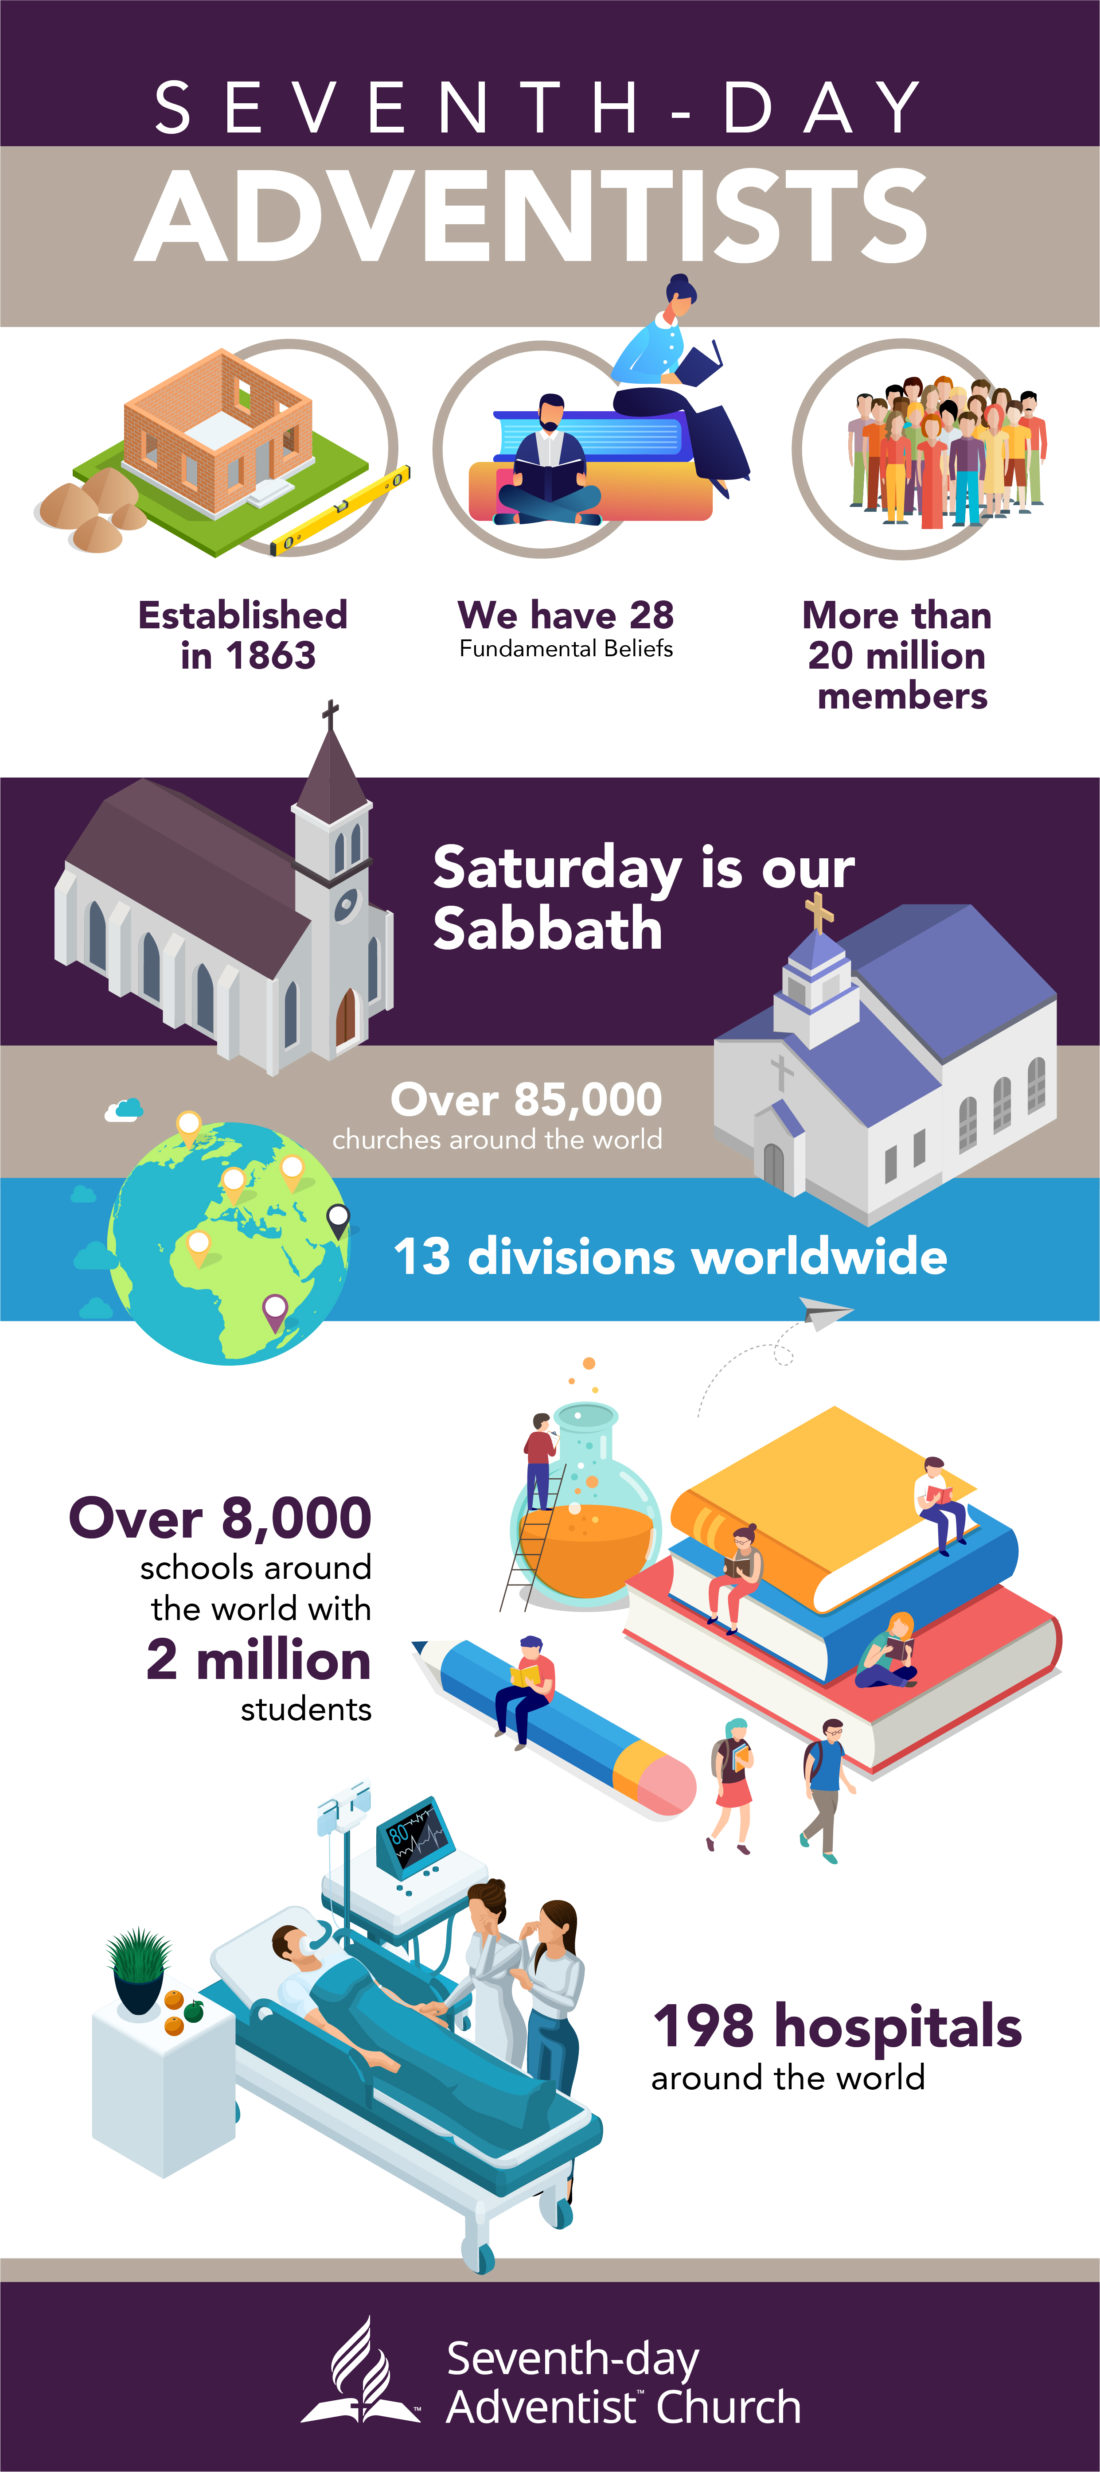 Why You Should Get To Know Seventh Day Adventists